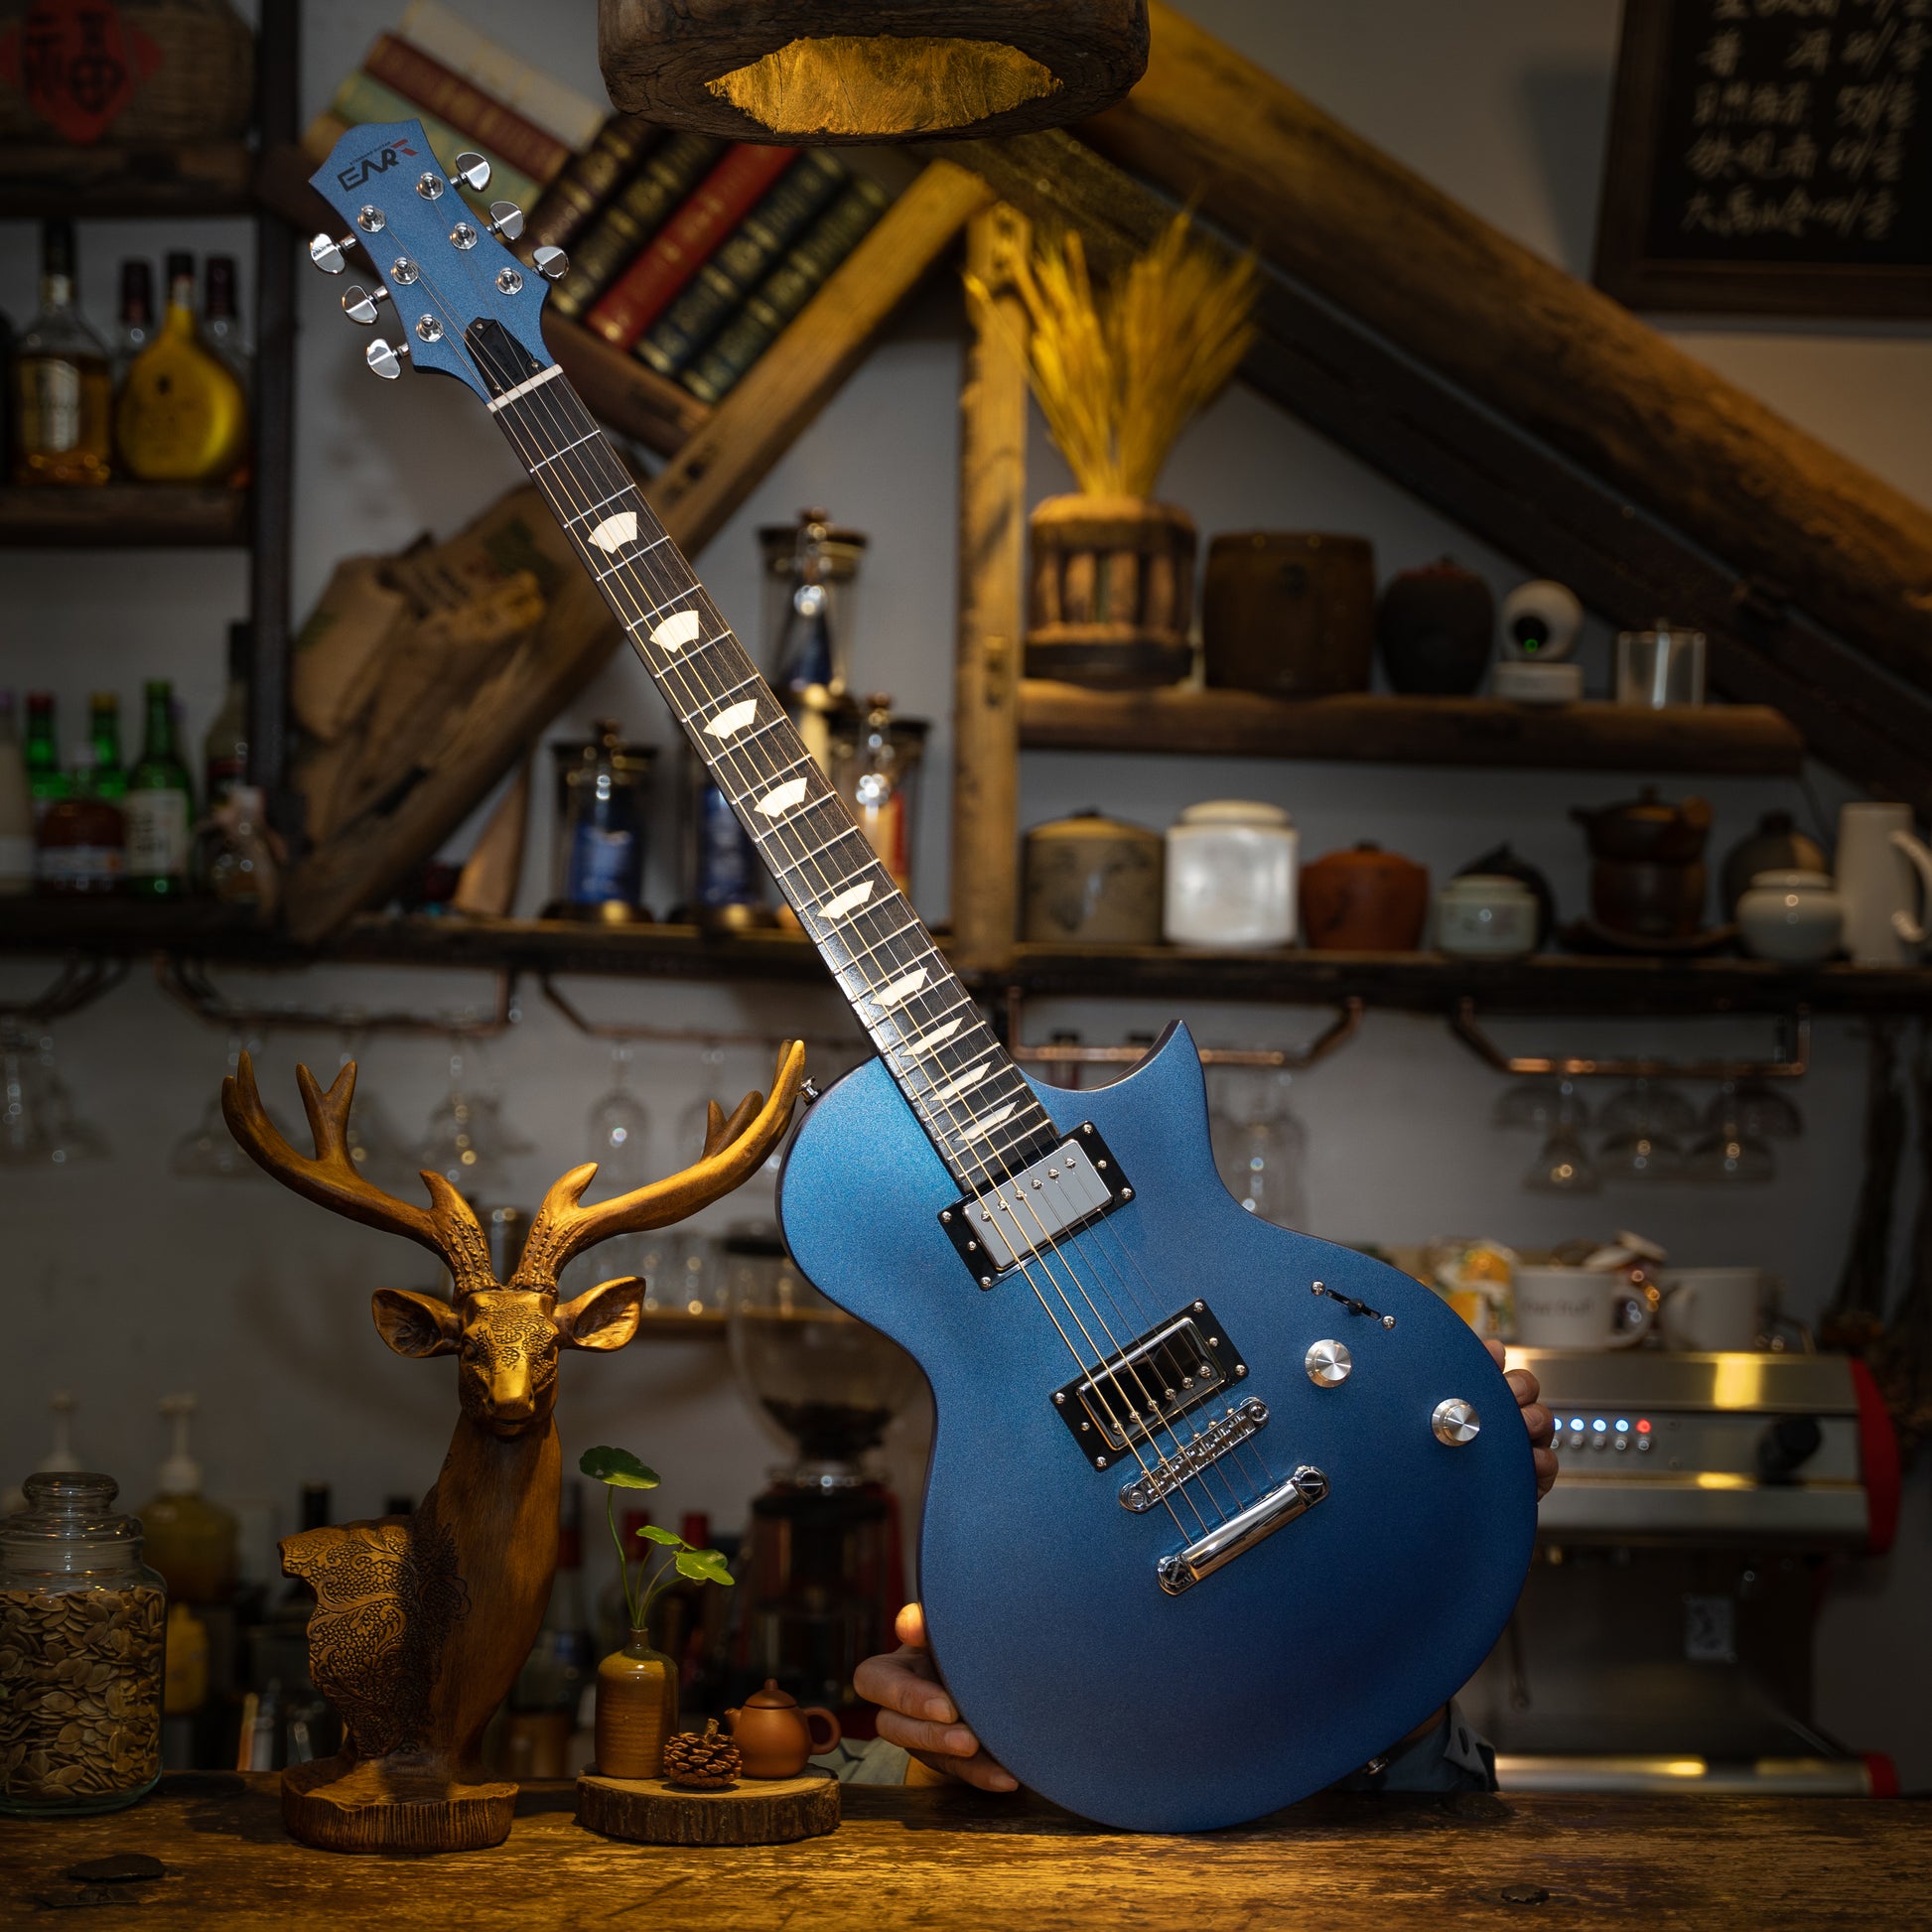 EART electric guitar EGLP-610 blue with a vase